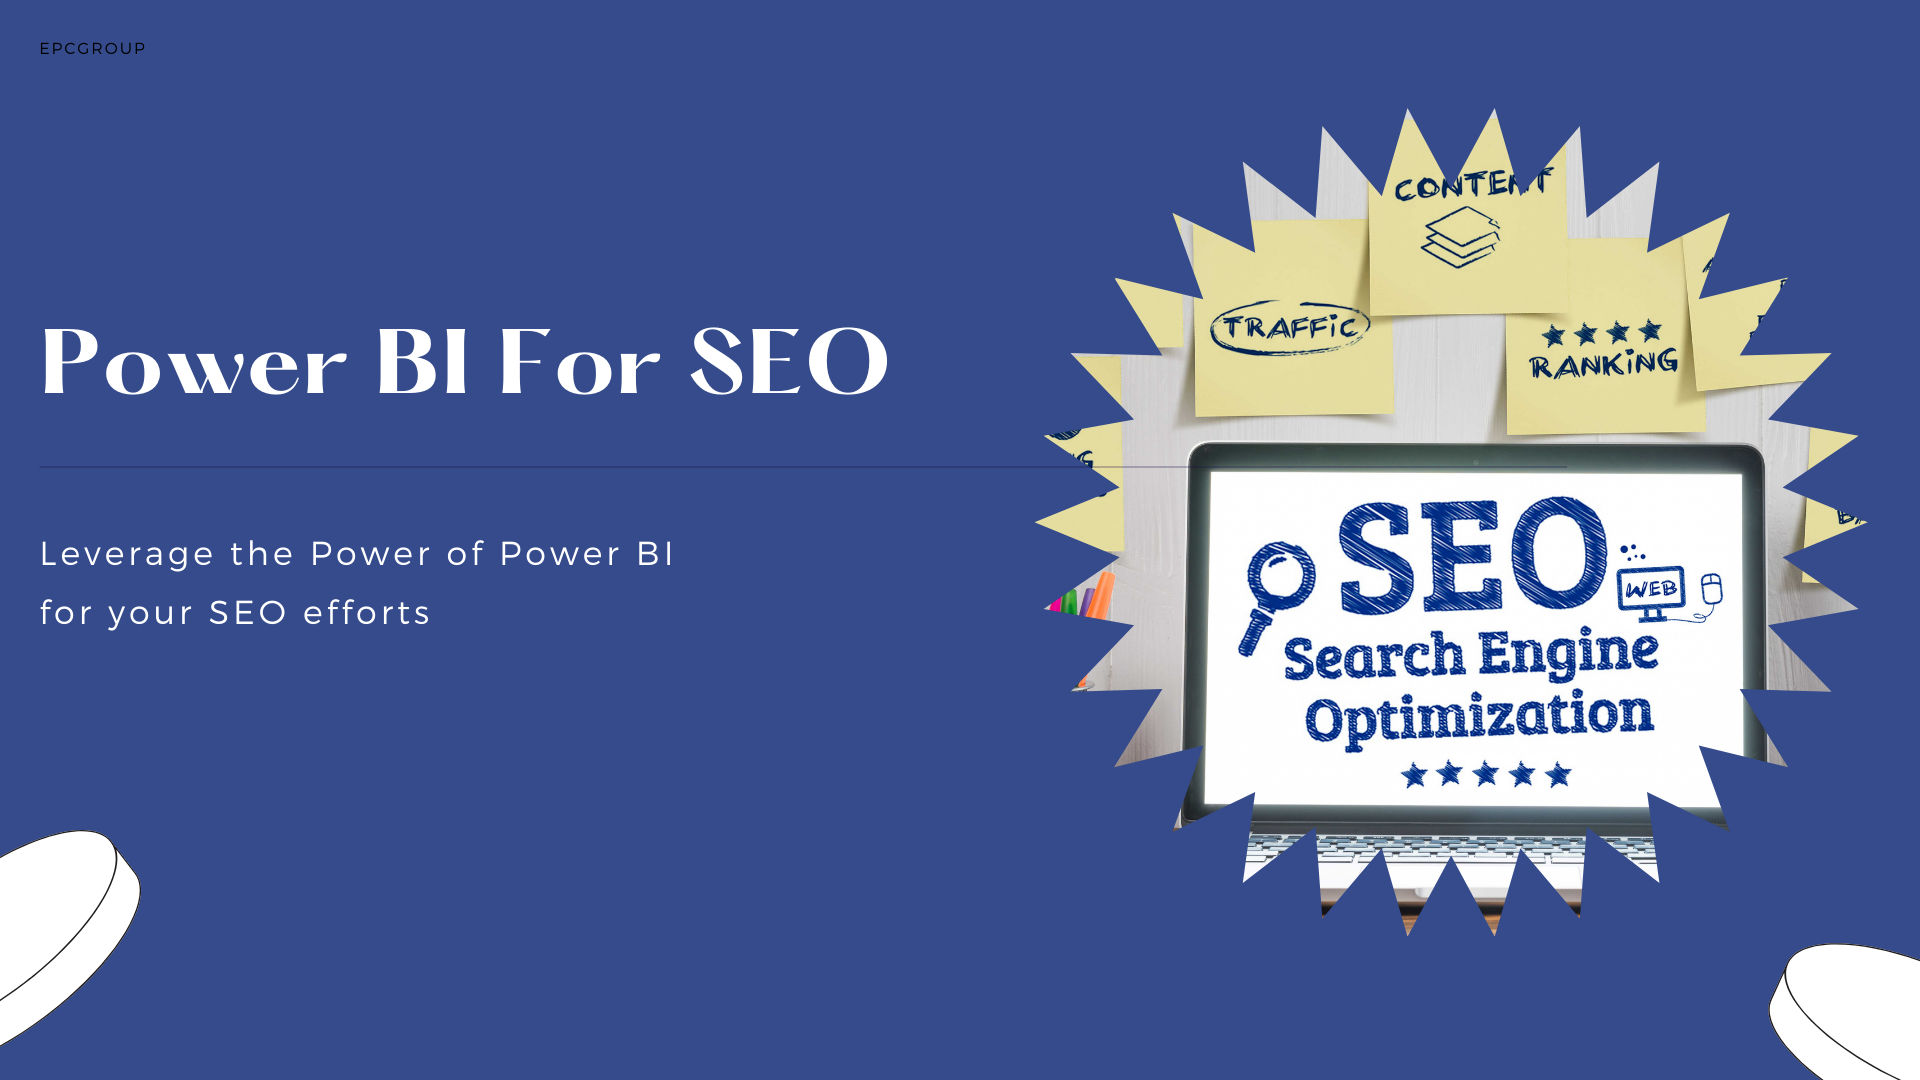 How Does The Power BI Help With The SEO Efforts?